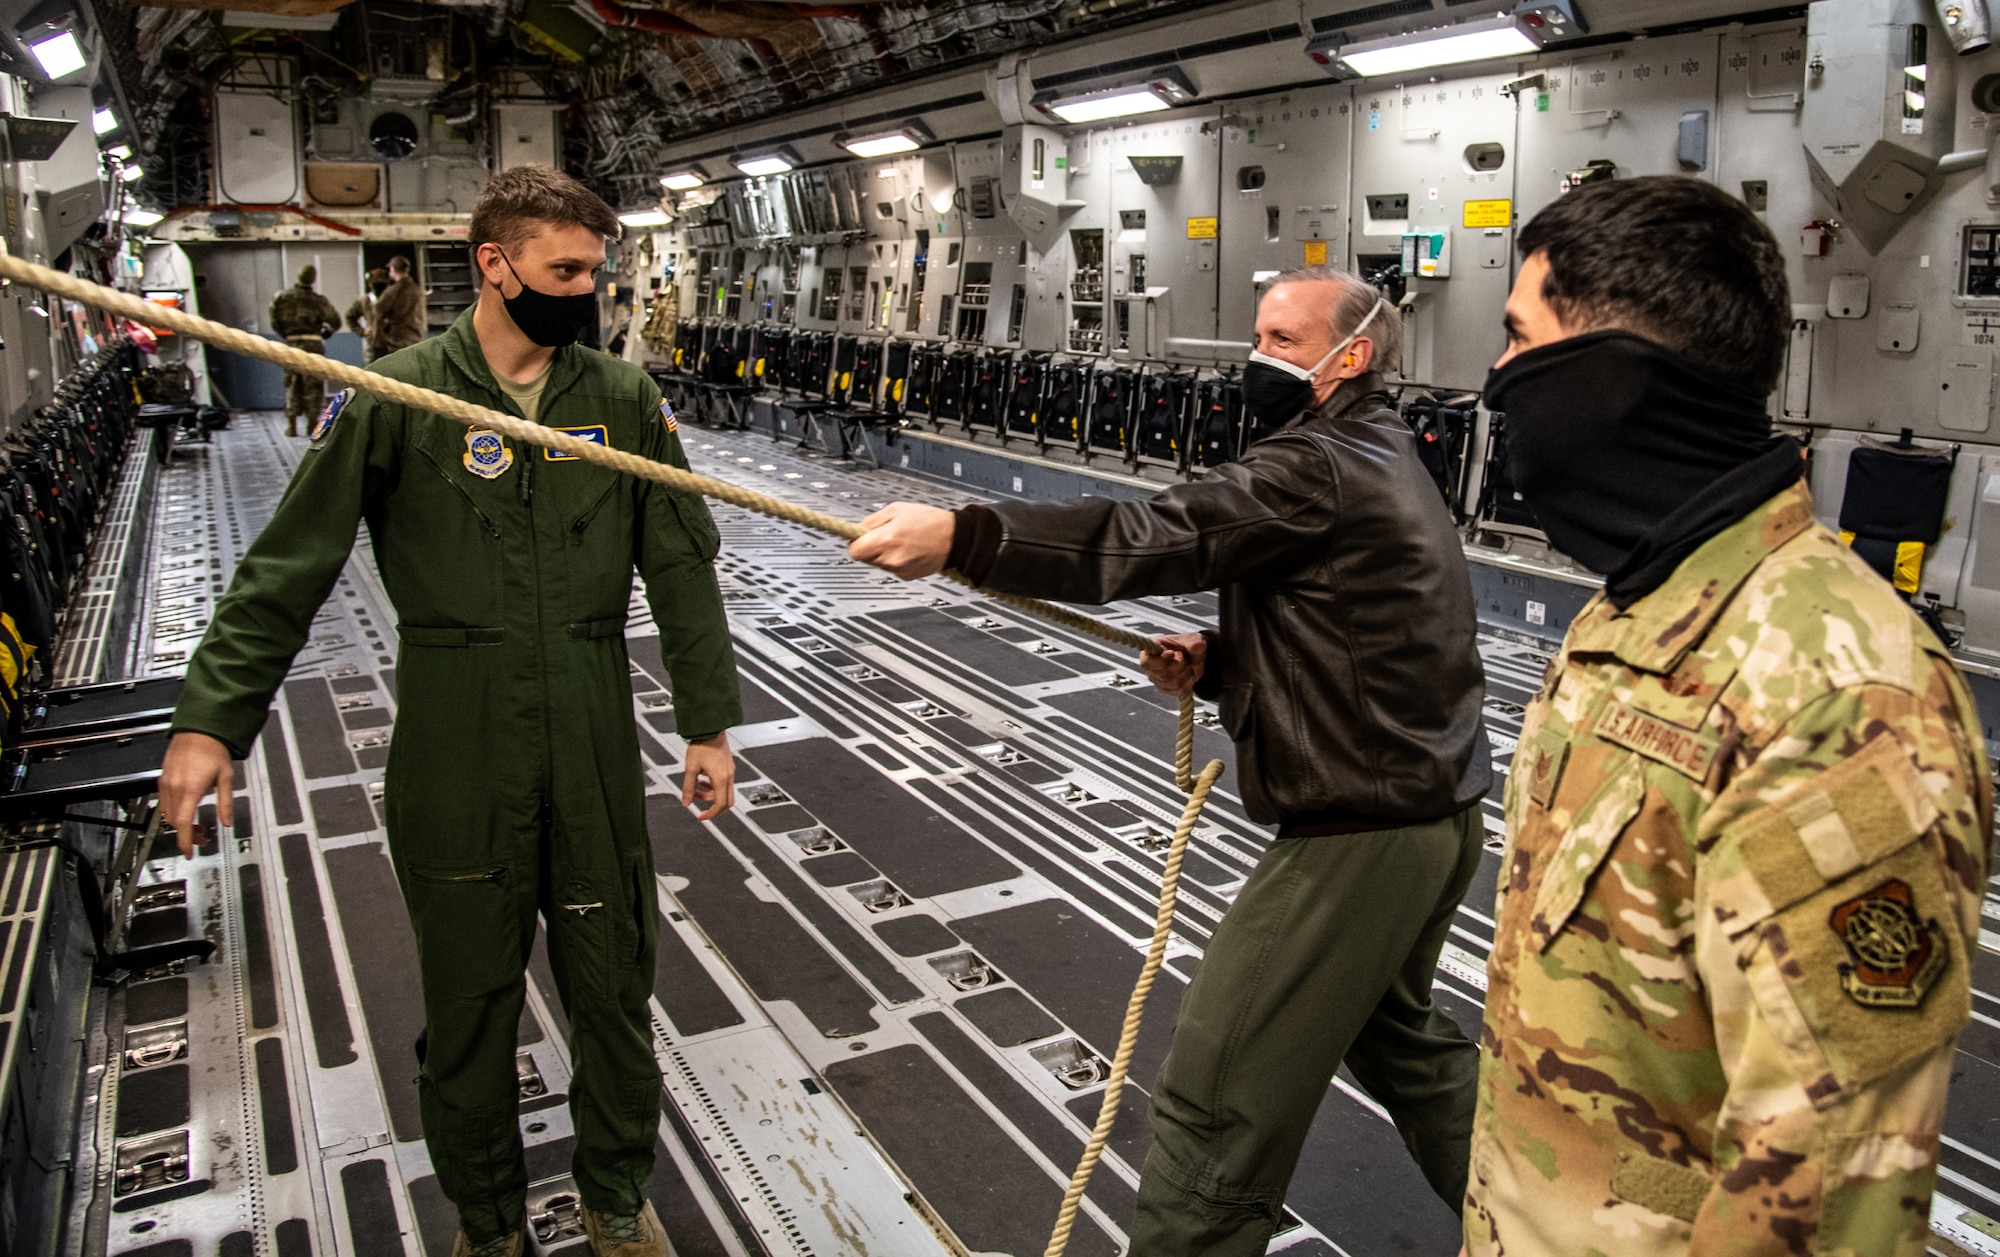 Col. John Rockwell, 436th Medical Group aerospace medicine chief, tests an emergency egress rope with Staff Sgt. Craig Tocci, 3rd Airlift Squadron loadmaster, and Technical Sgt. Jose Cardoza, 3rd AS loadmaster, on a C-17 Globemaster III at Dover Air Force Base, Delaware, Jan. 28, 2021. Emergency egress is a training requirement for all aircrew members. The 3rd AS routinely trains to support global engagement through direct delivery of time-critical theater deployment assets and ensure aircrew operational readiness. (U.S. Air Force photo by Airman 1st Class Faith Schaefer)